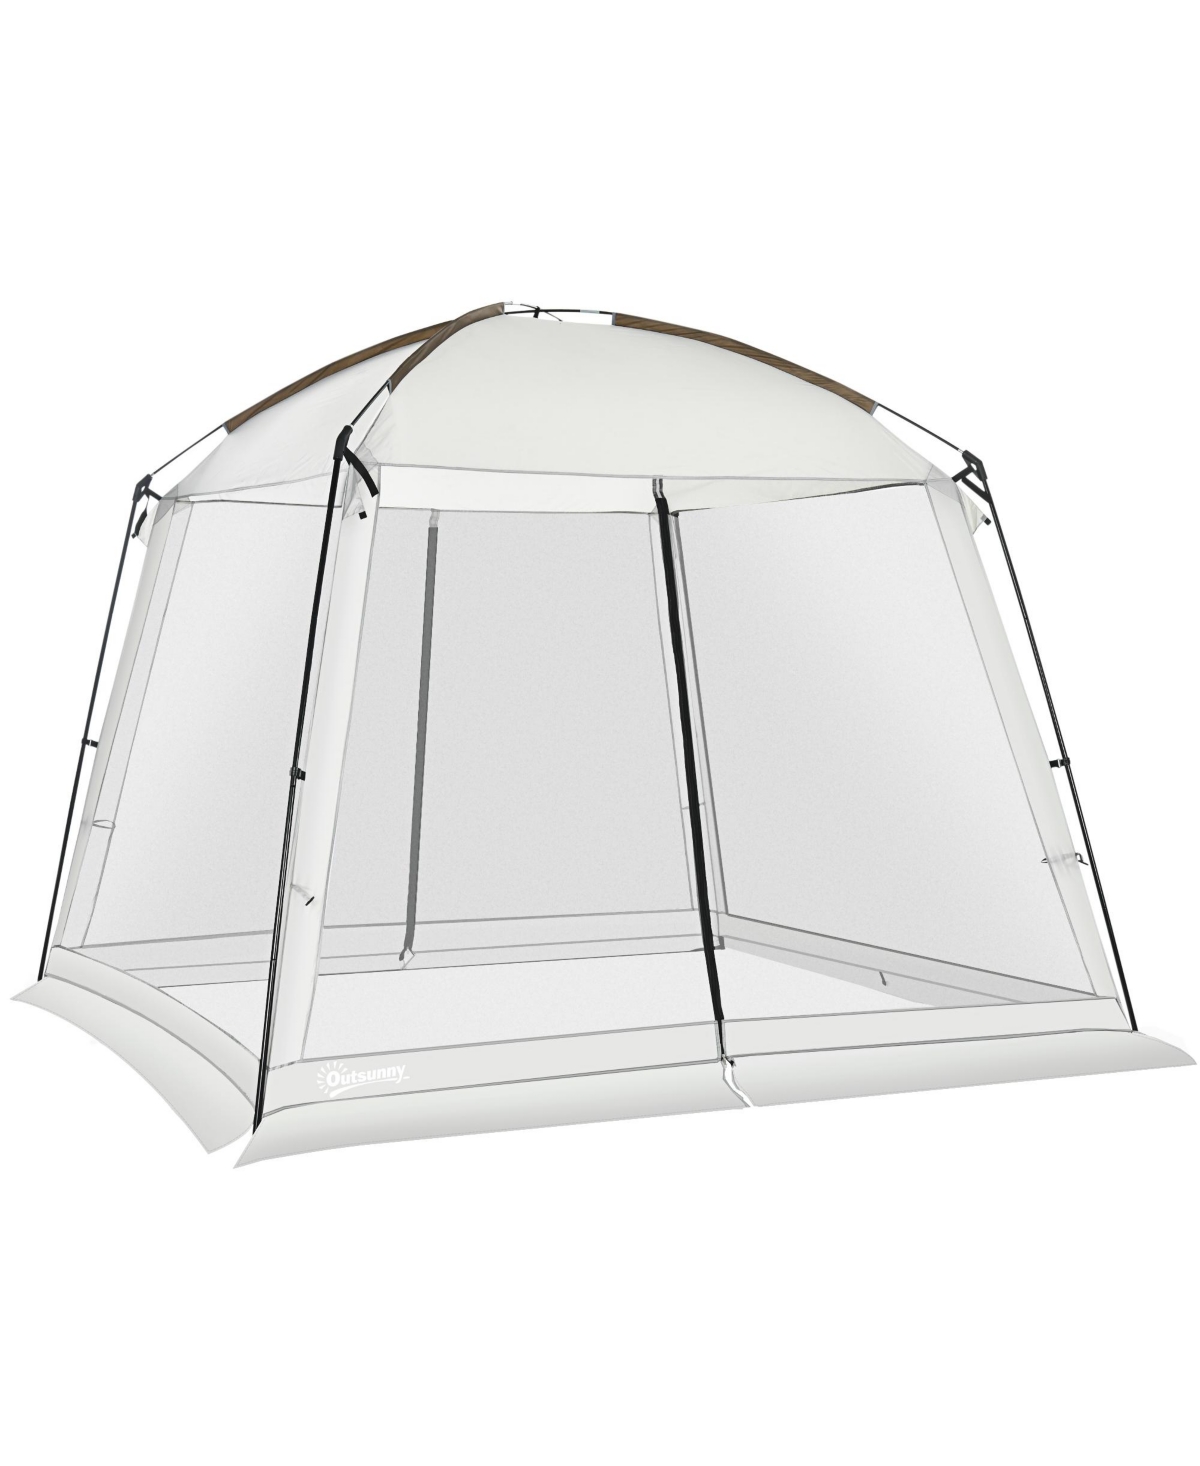 10' x 10' Screen House Room, UV50+ Screen Tent with 2 Doors and Carry Bag, Easy Setup, for Patios Outdoor Camping Activities - White